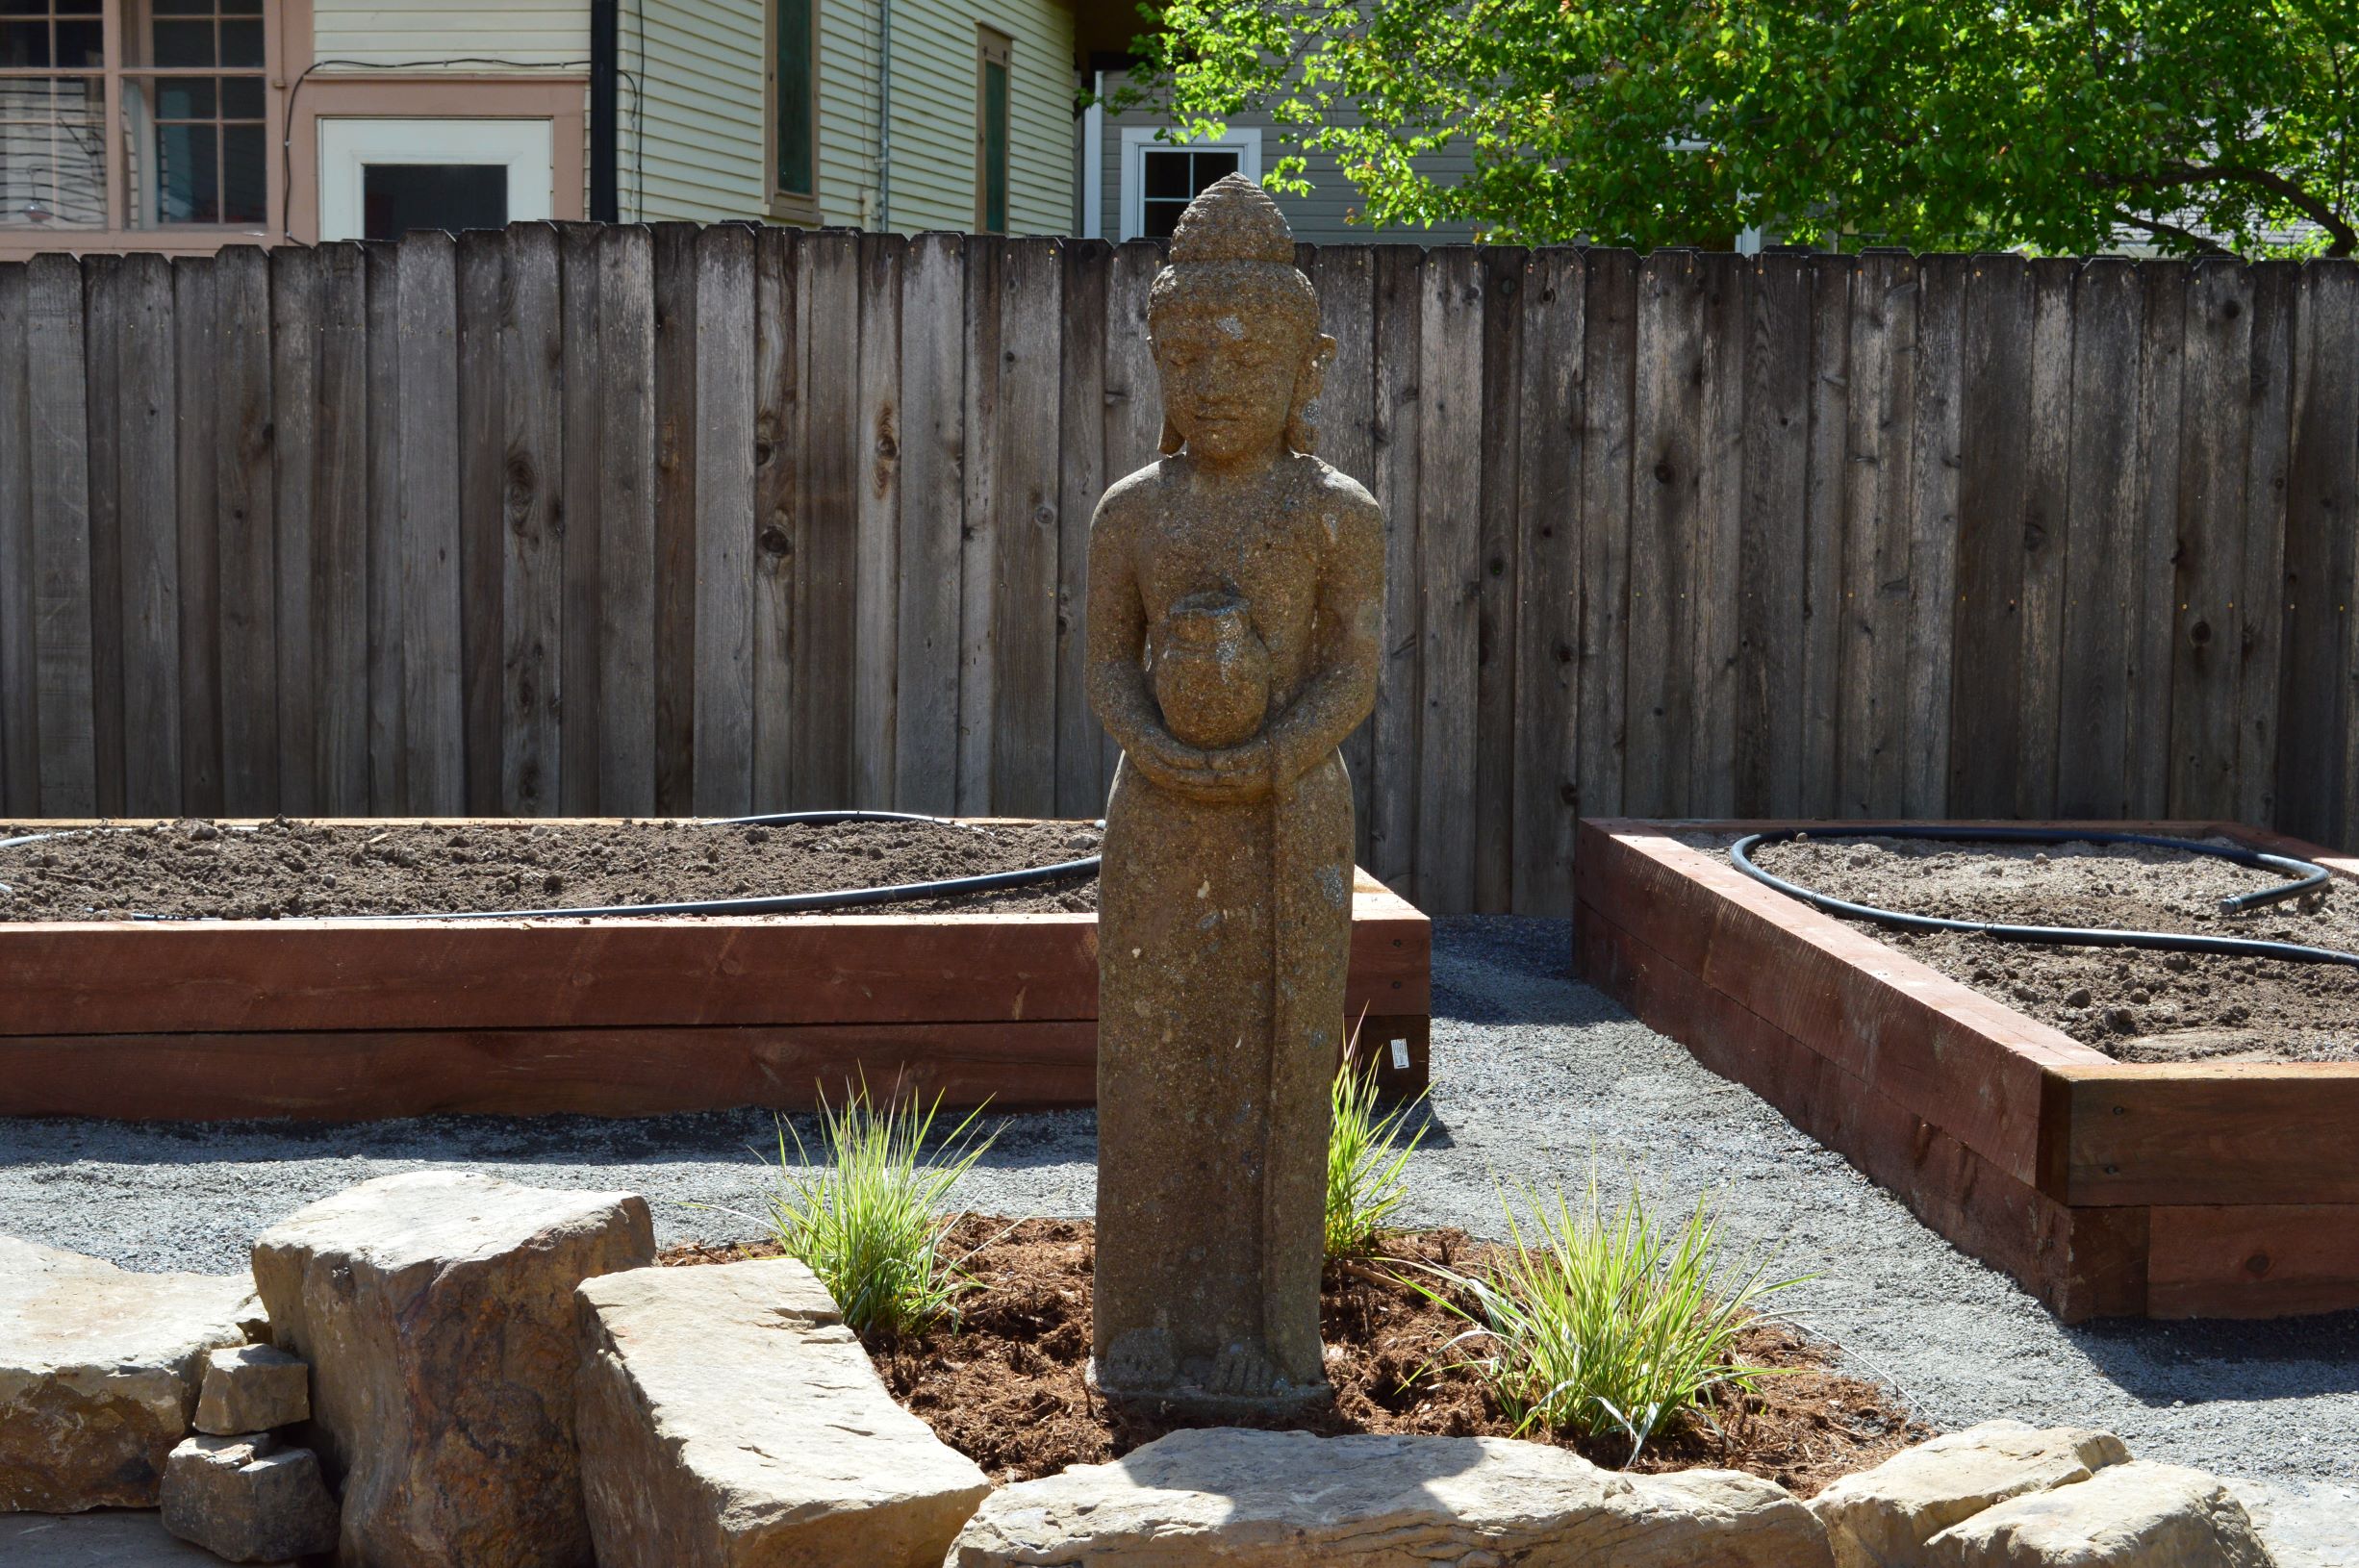 Statue placed in mulch surrounded by large decorative rock with flat stone steps and small gravel path.